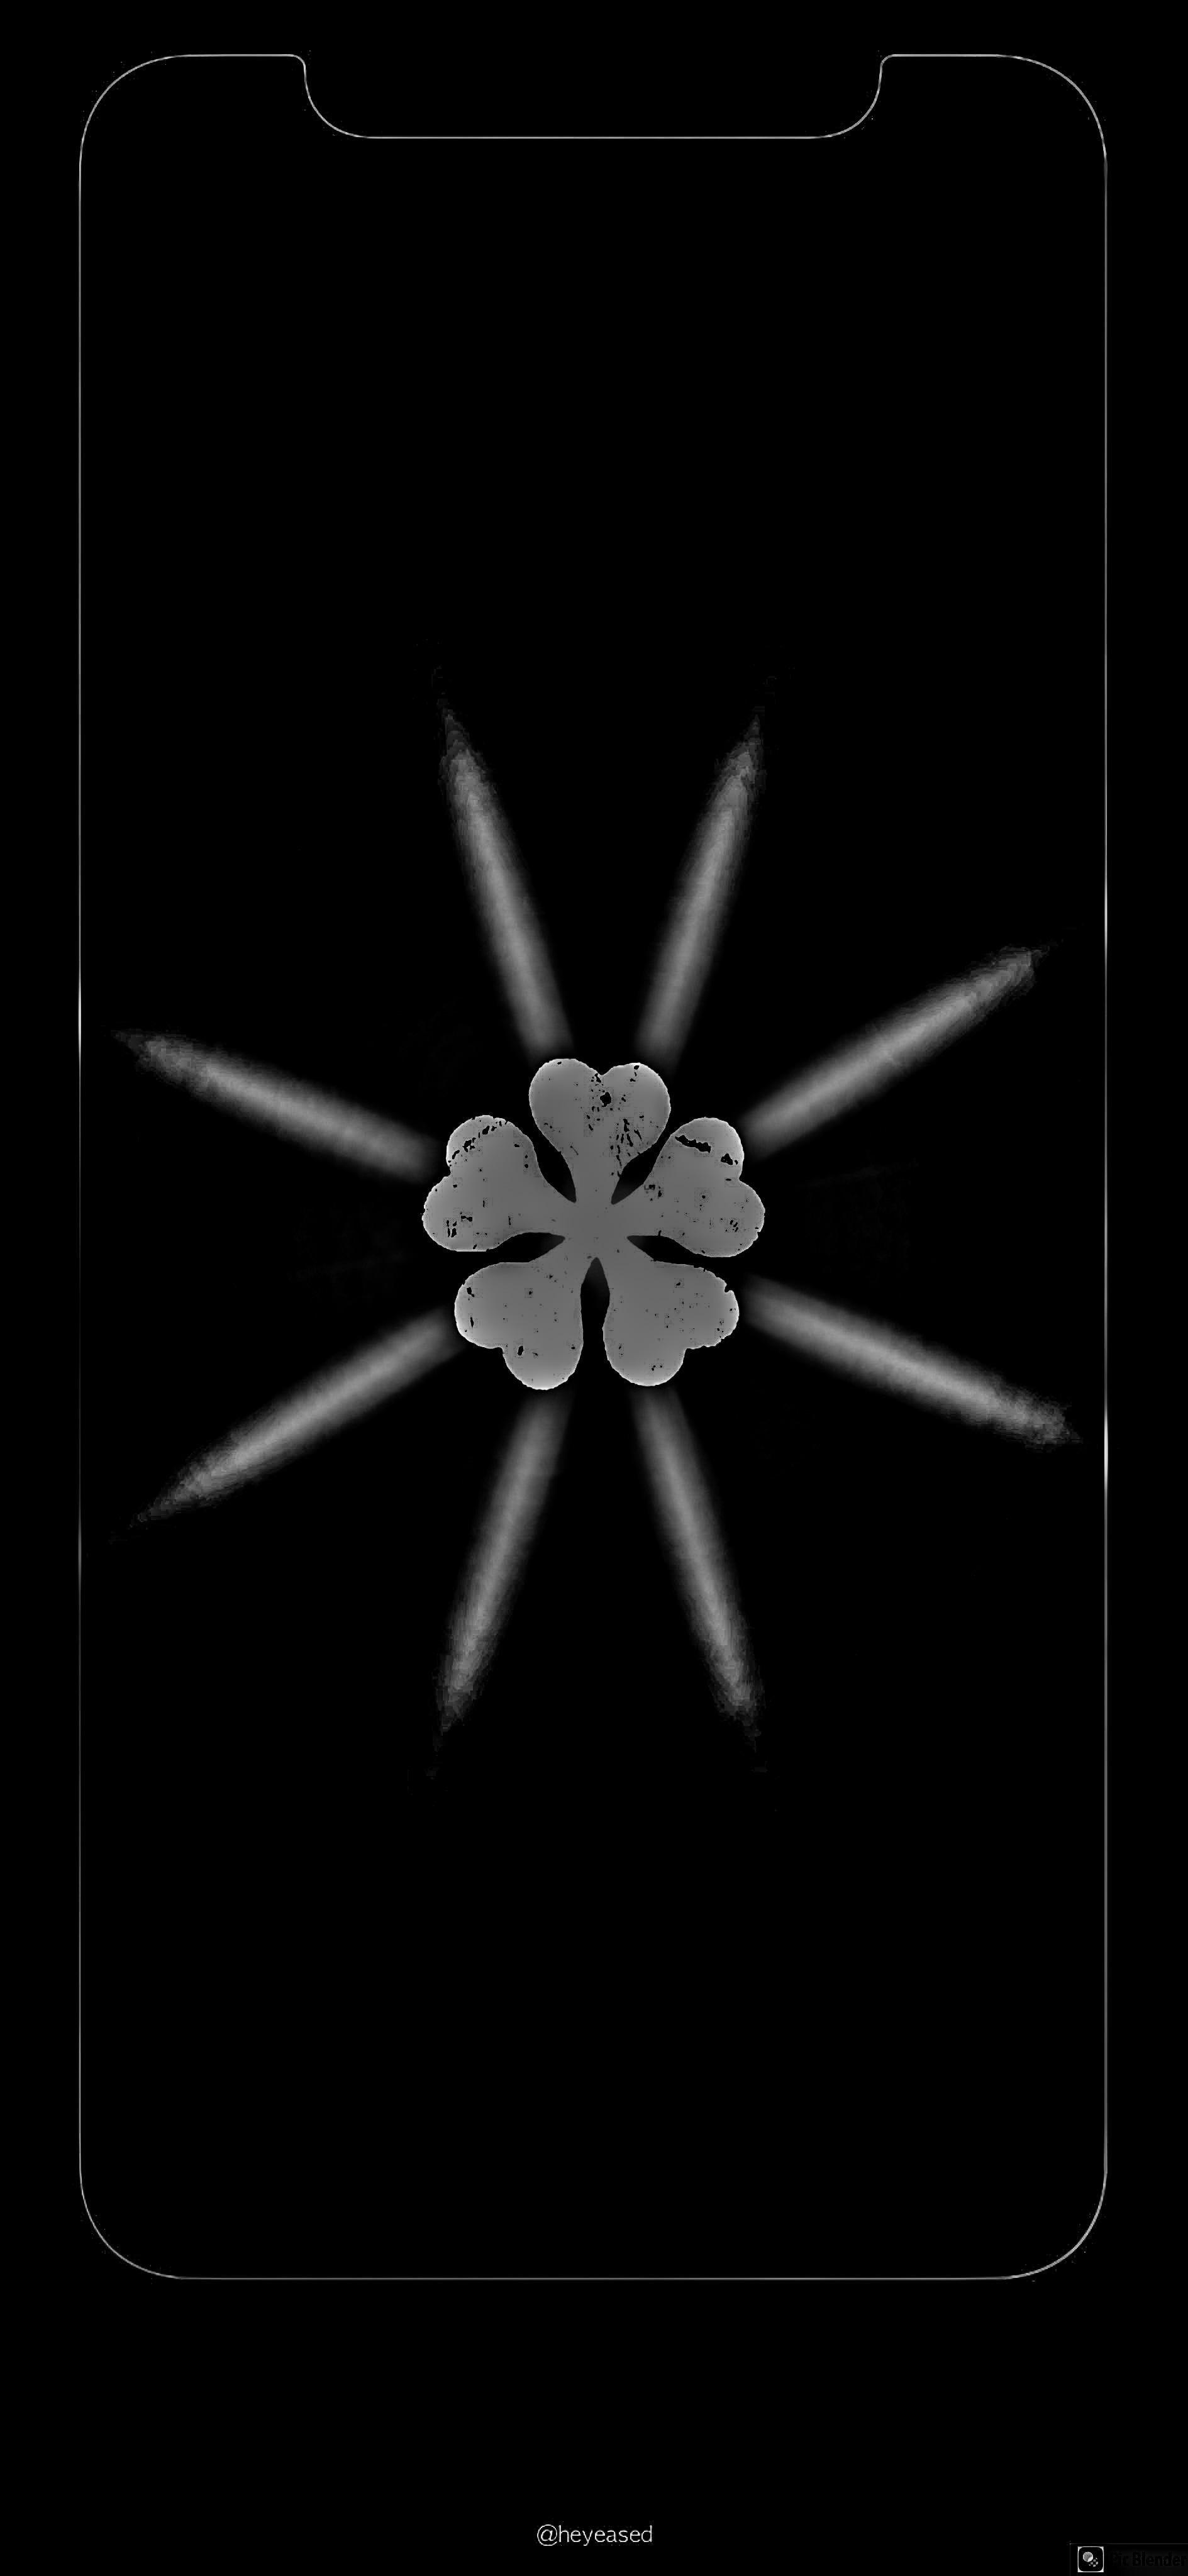 Made Five Leaf Clover wallpaper for iPhone Xs